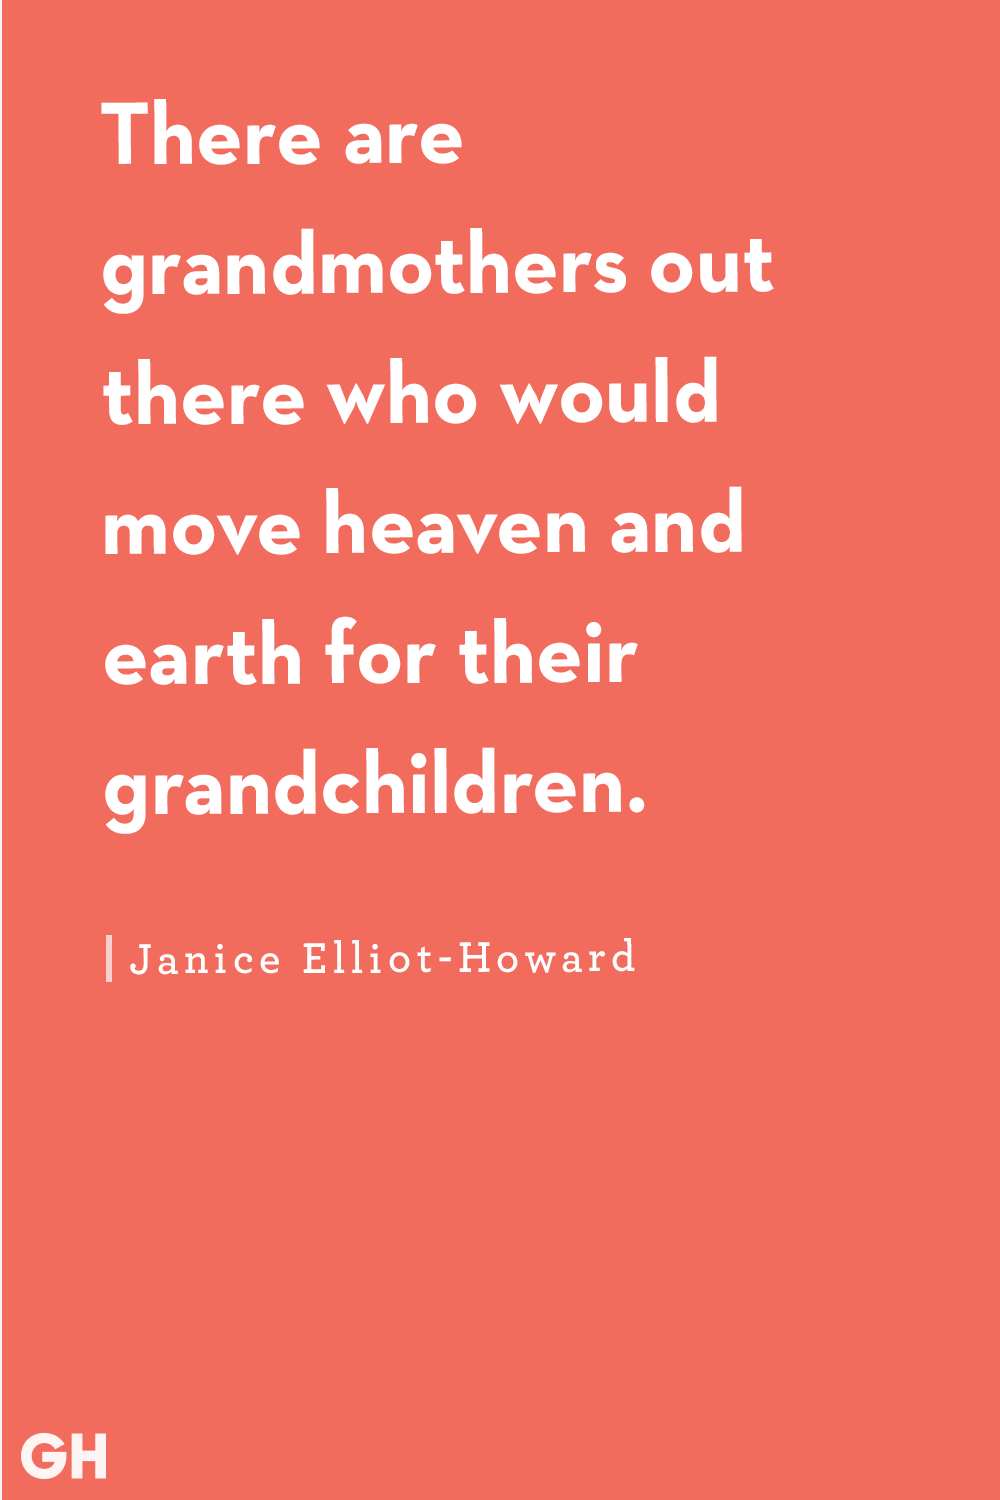 grandchildren quotes and sayings